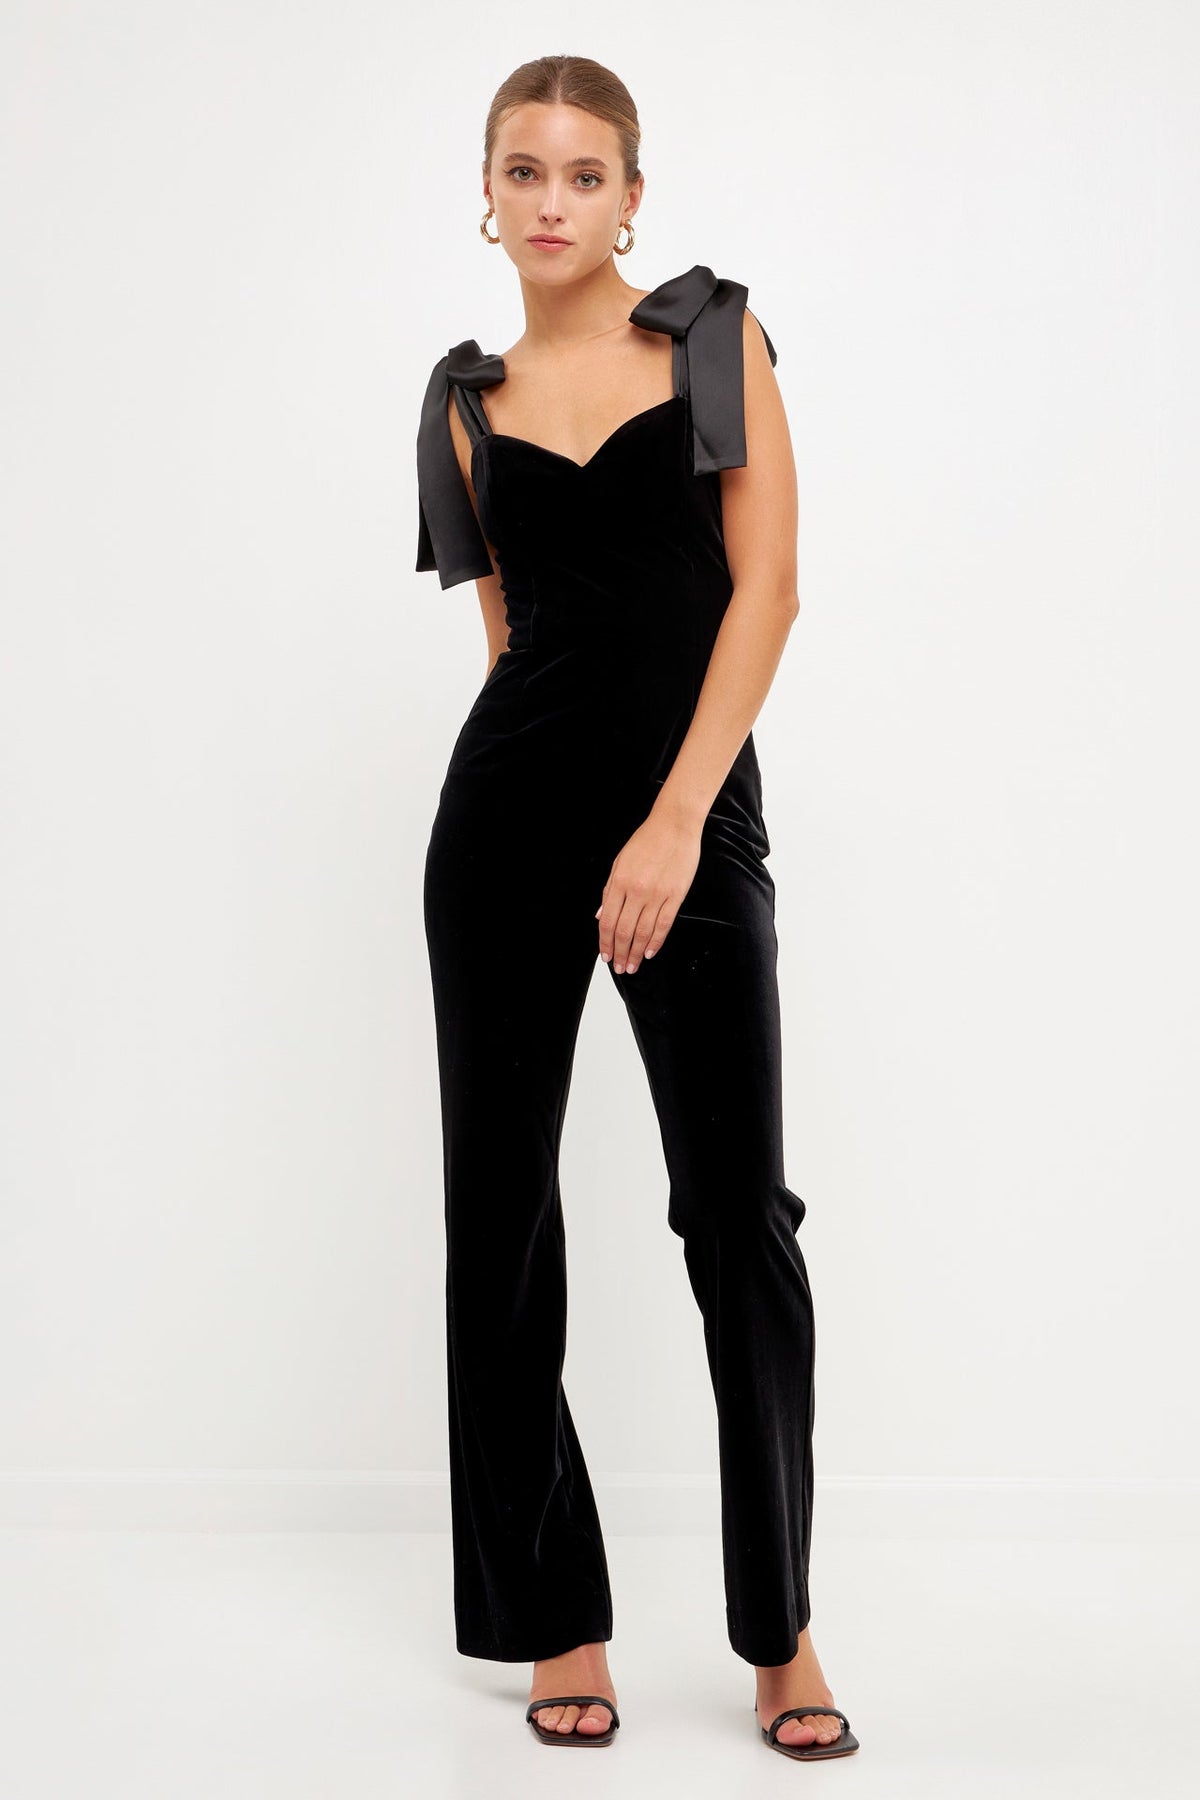 ENDLESS ROSE - Velvet Satin Sweetheart Jumpsuit - JUMPSUITS available at Objectrare